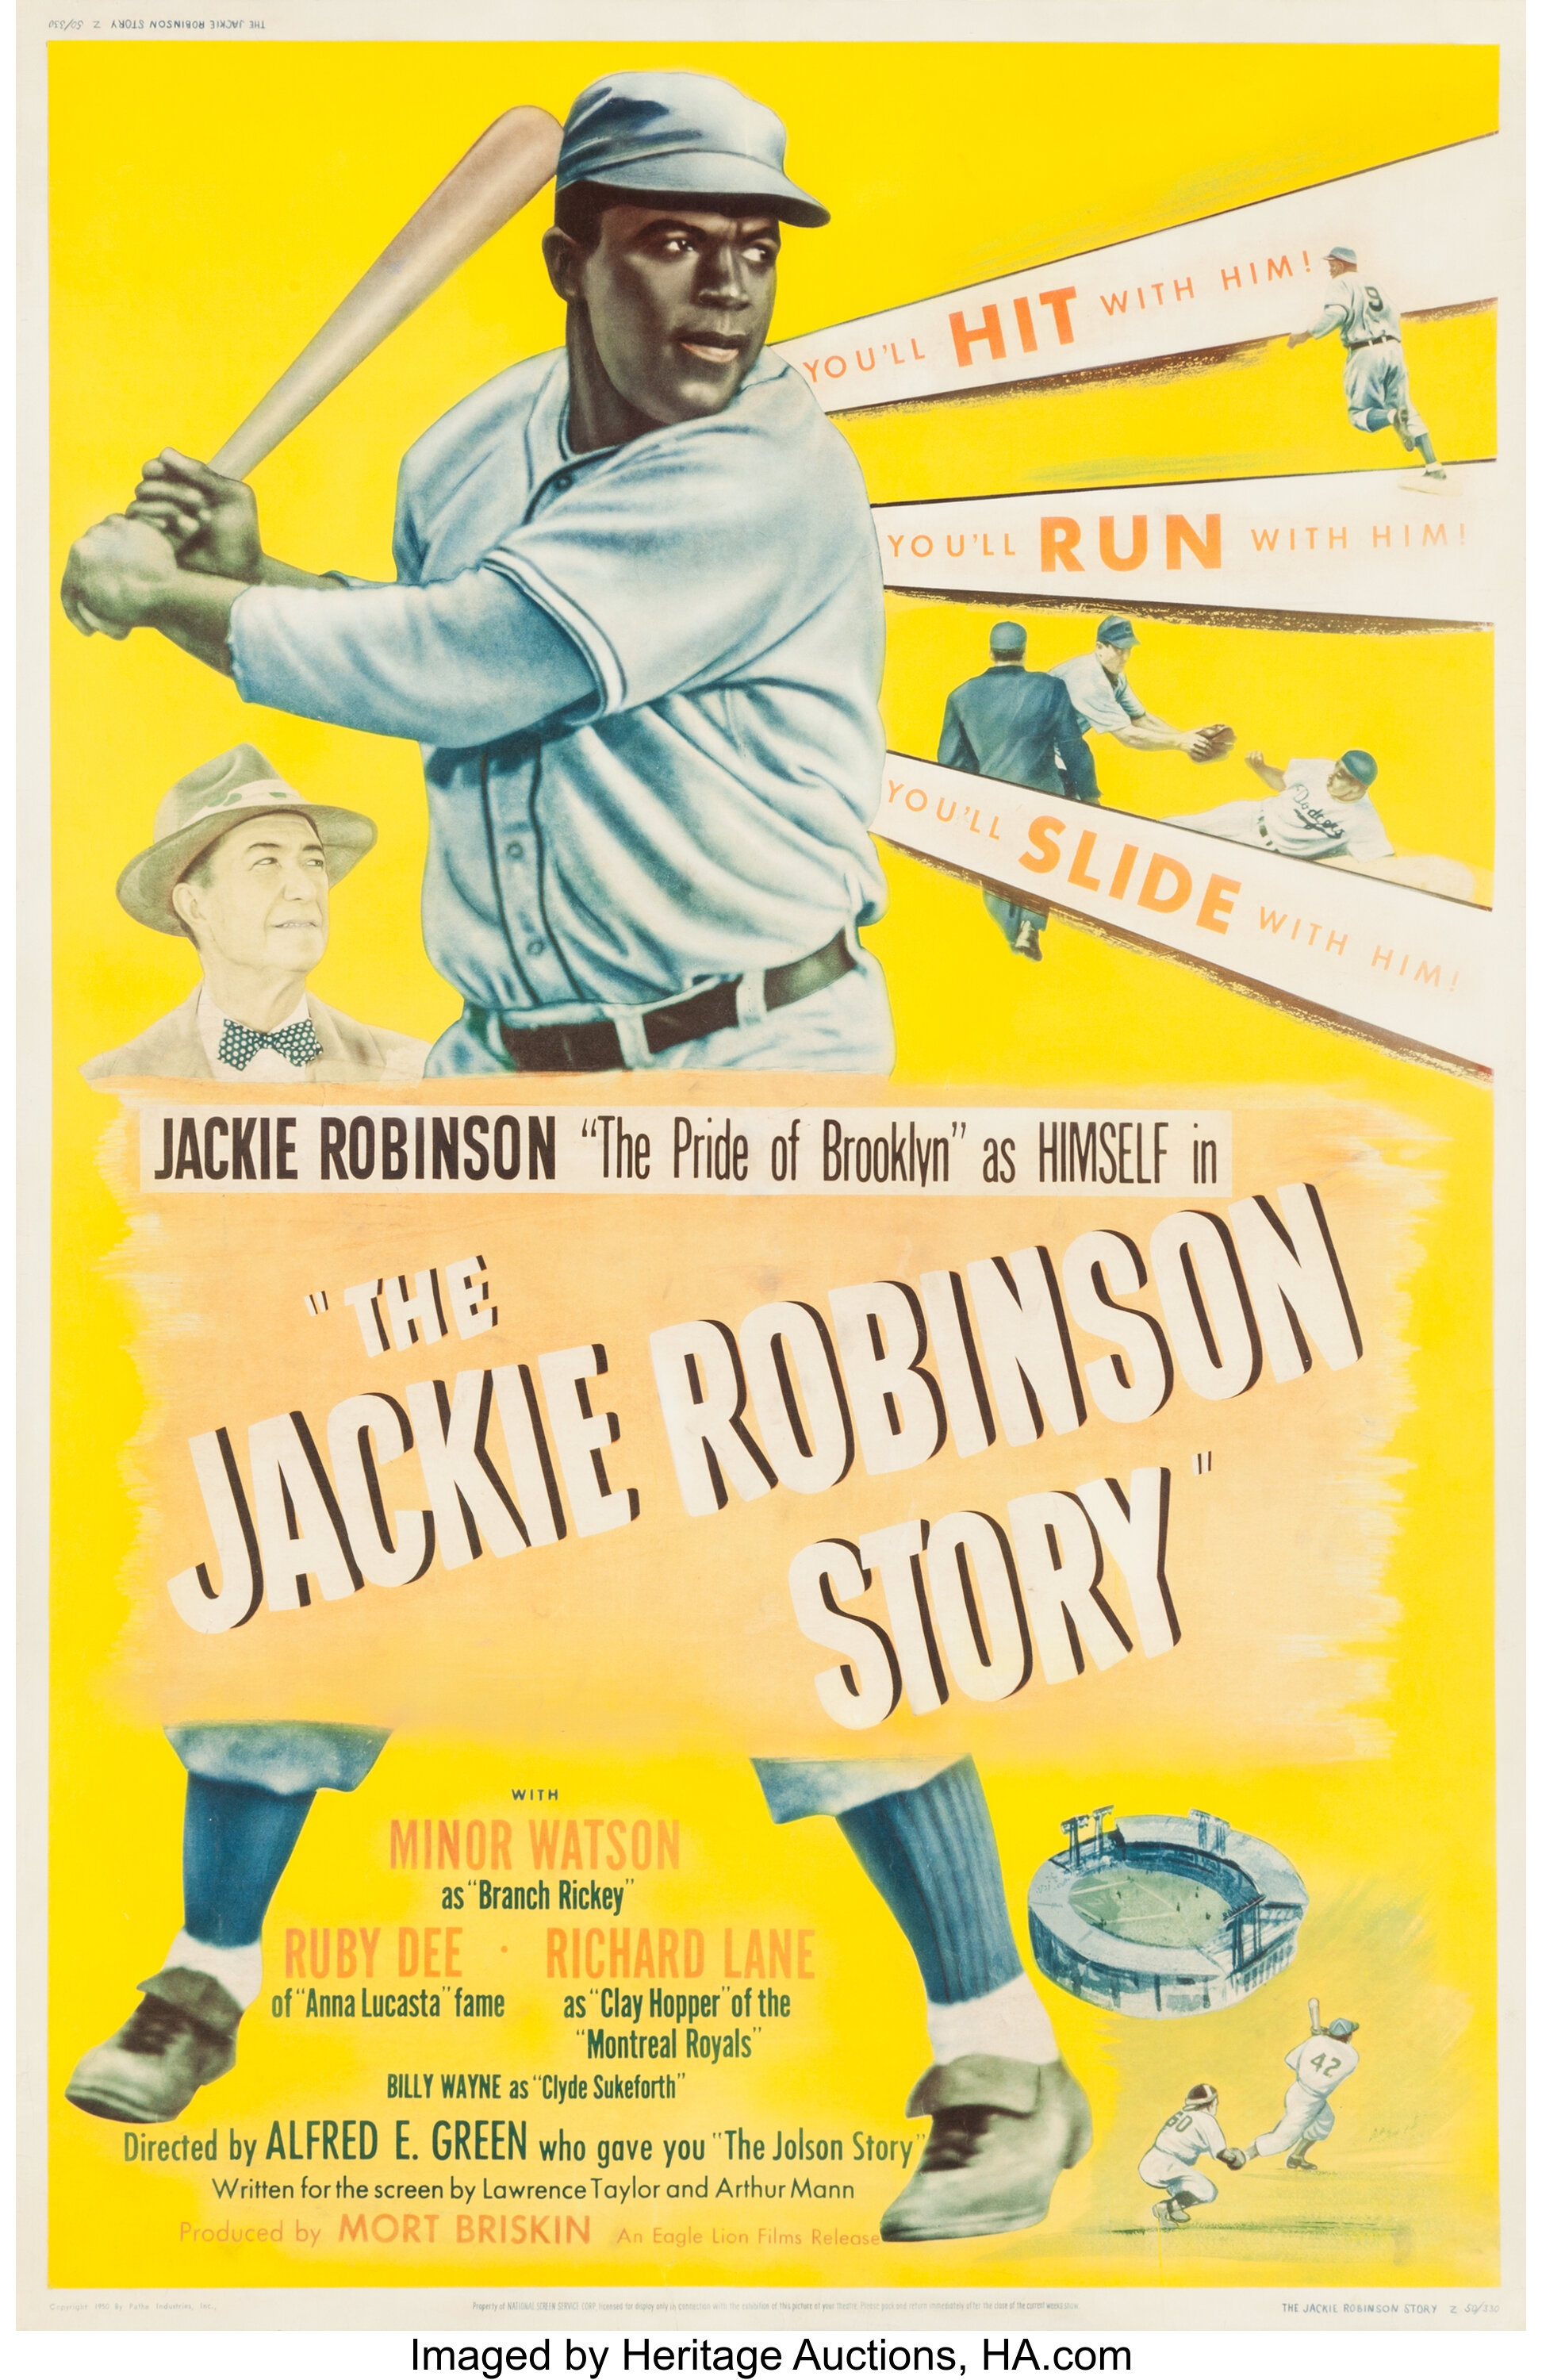 The Jackie Robinson Story (1950) - Turner Classic Movies